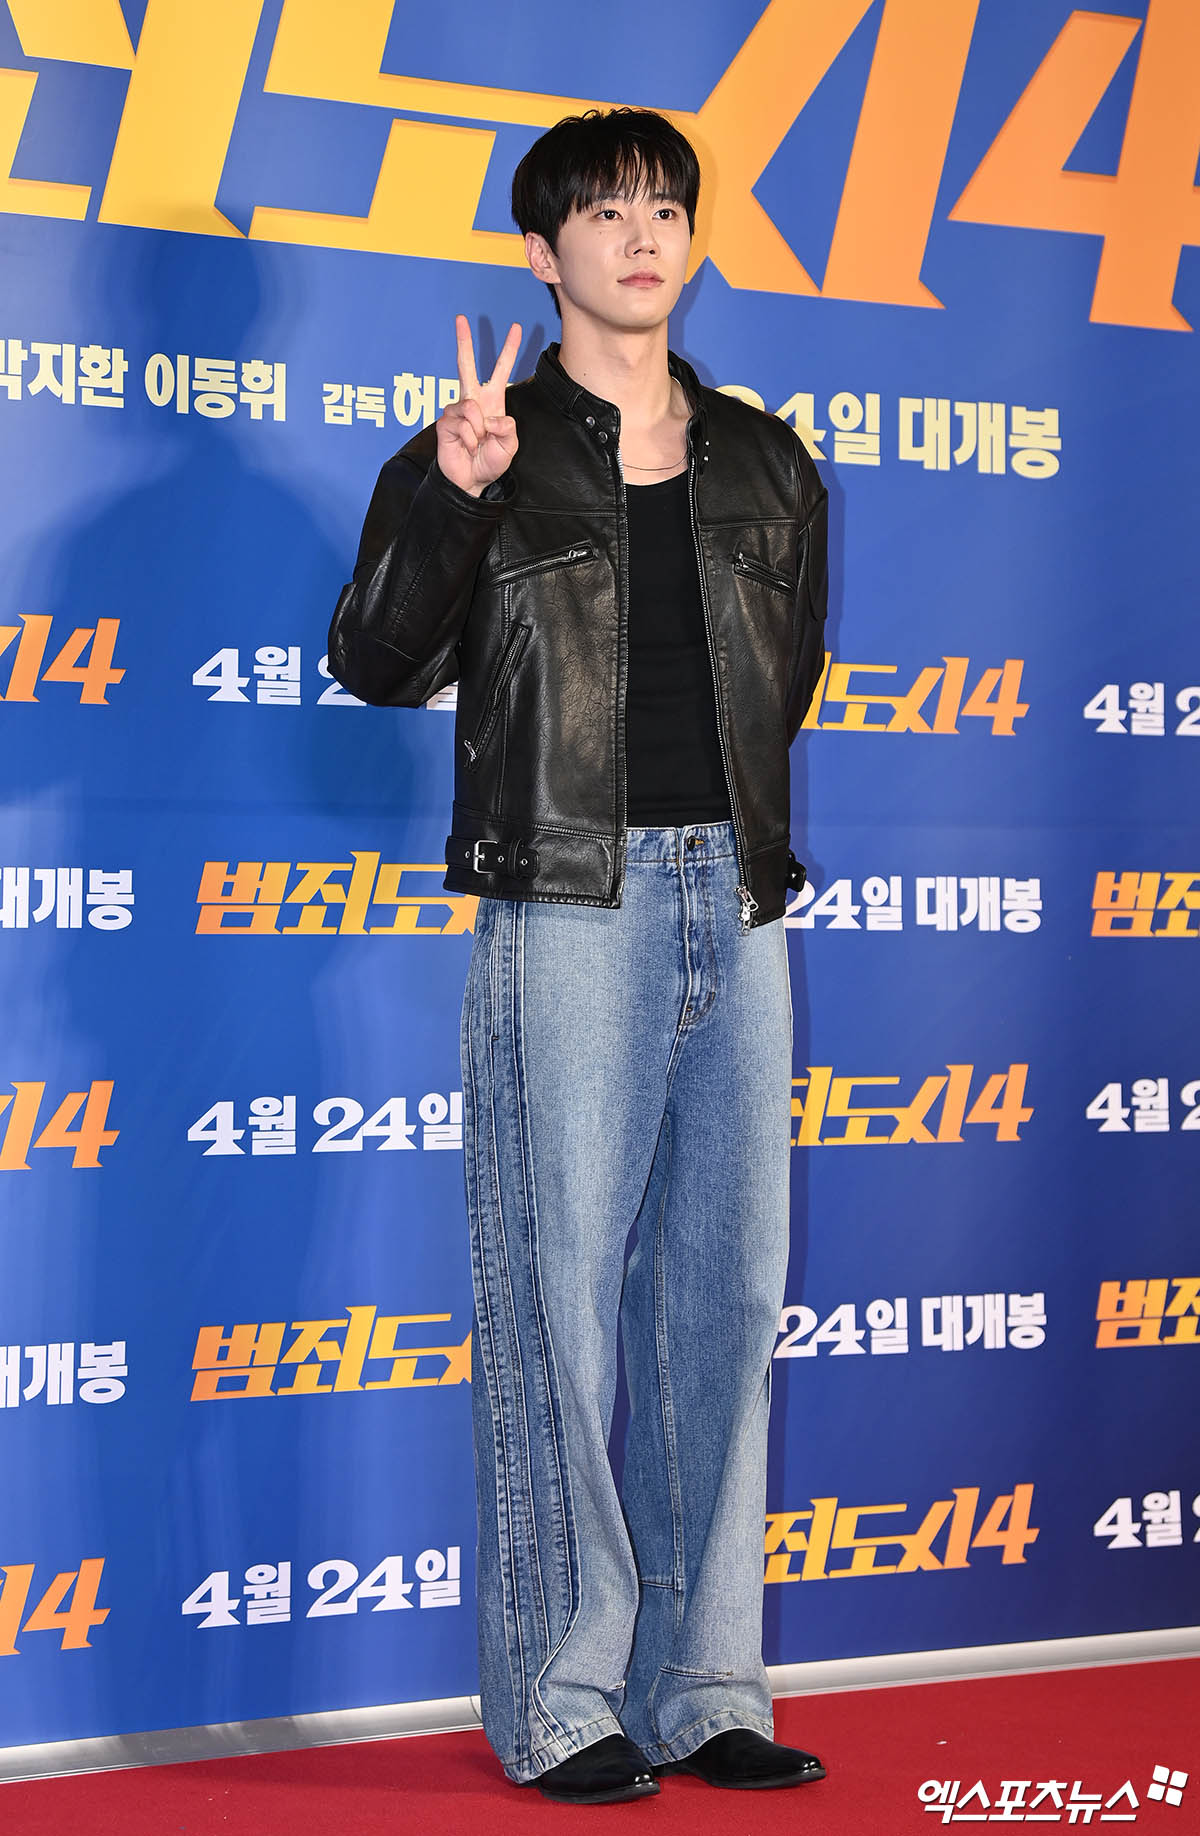 Lee Jun Young The Roundup Punishment vip premiere